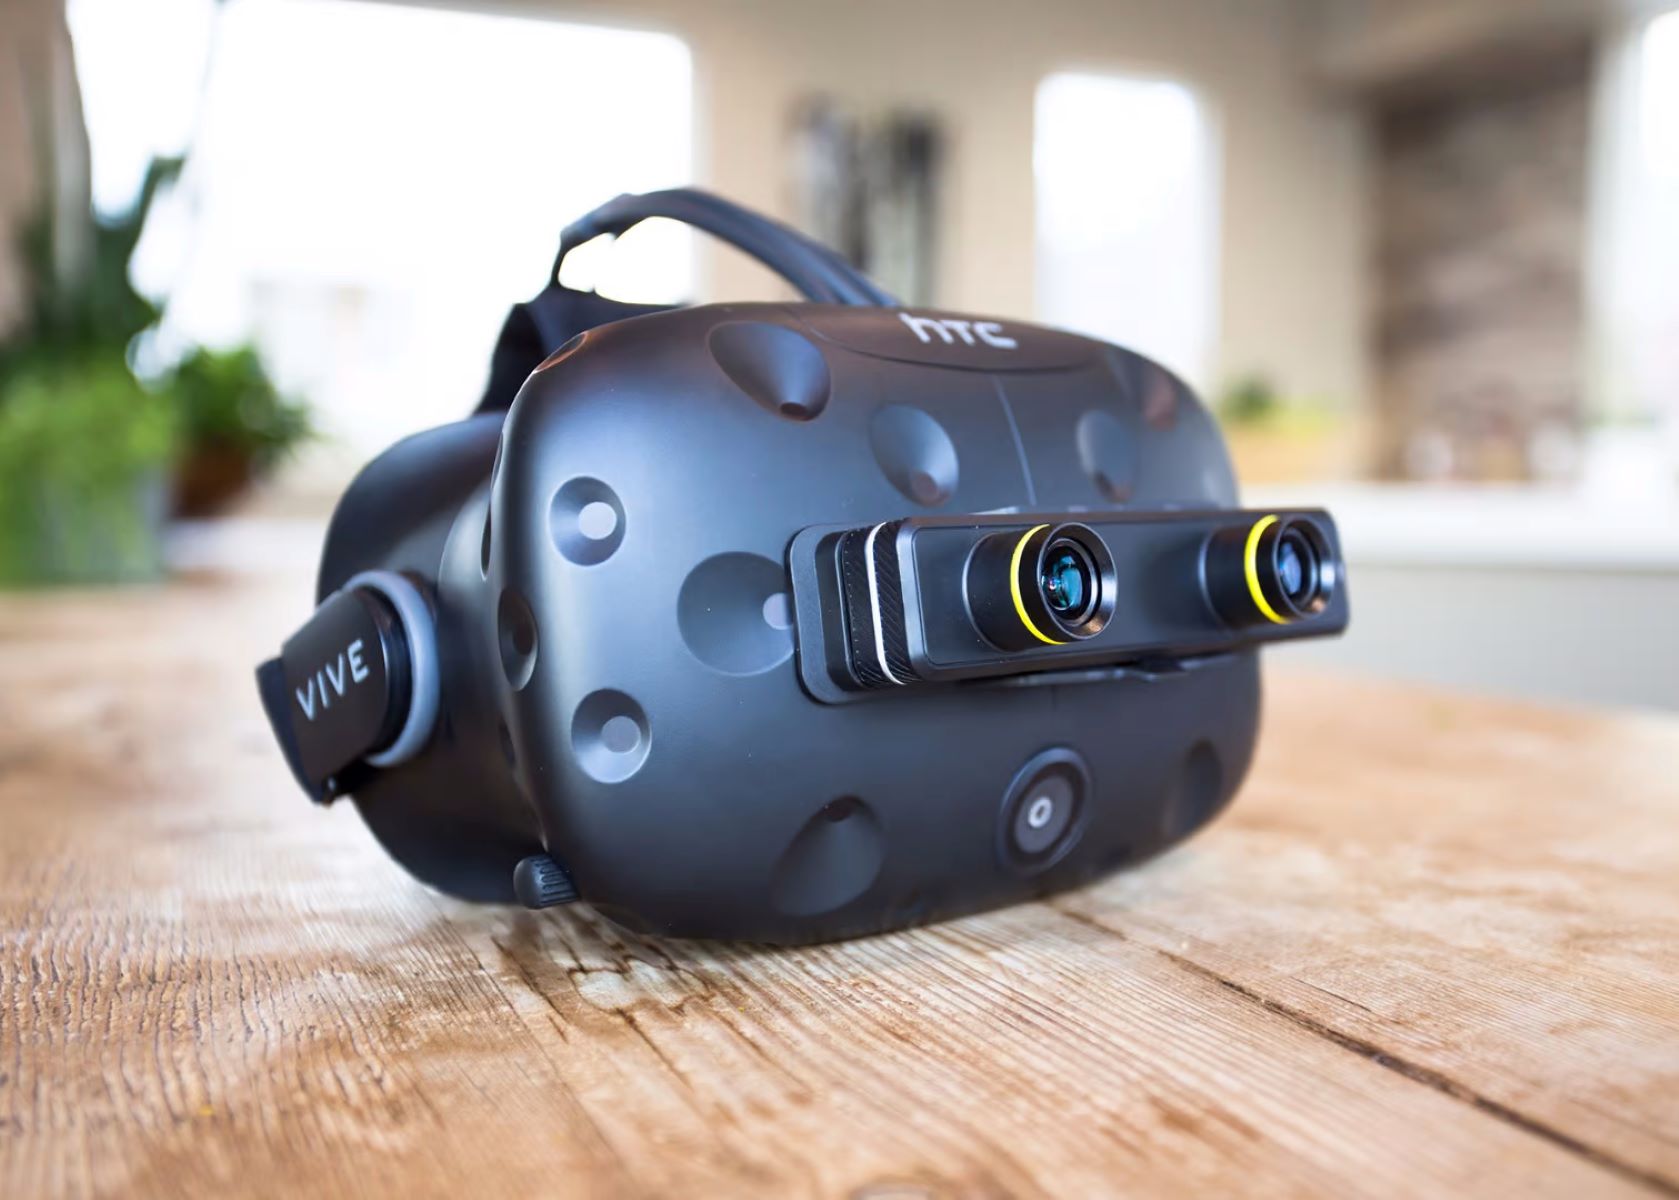 How Many Cameras Come With The HTC Vive